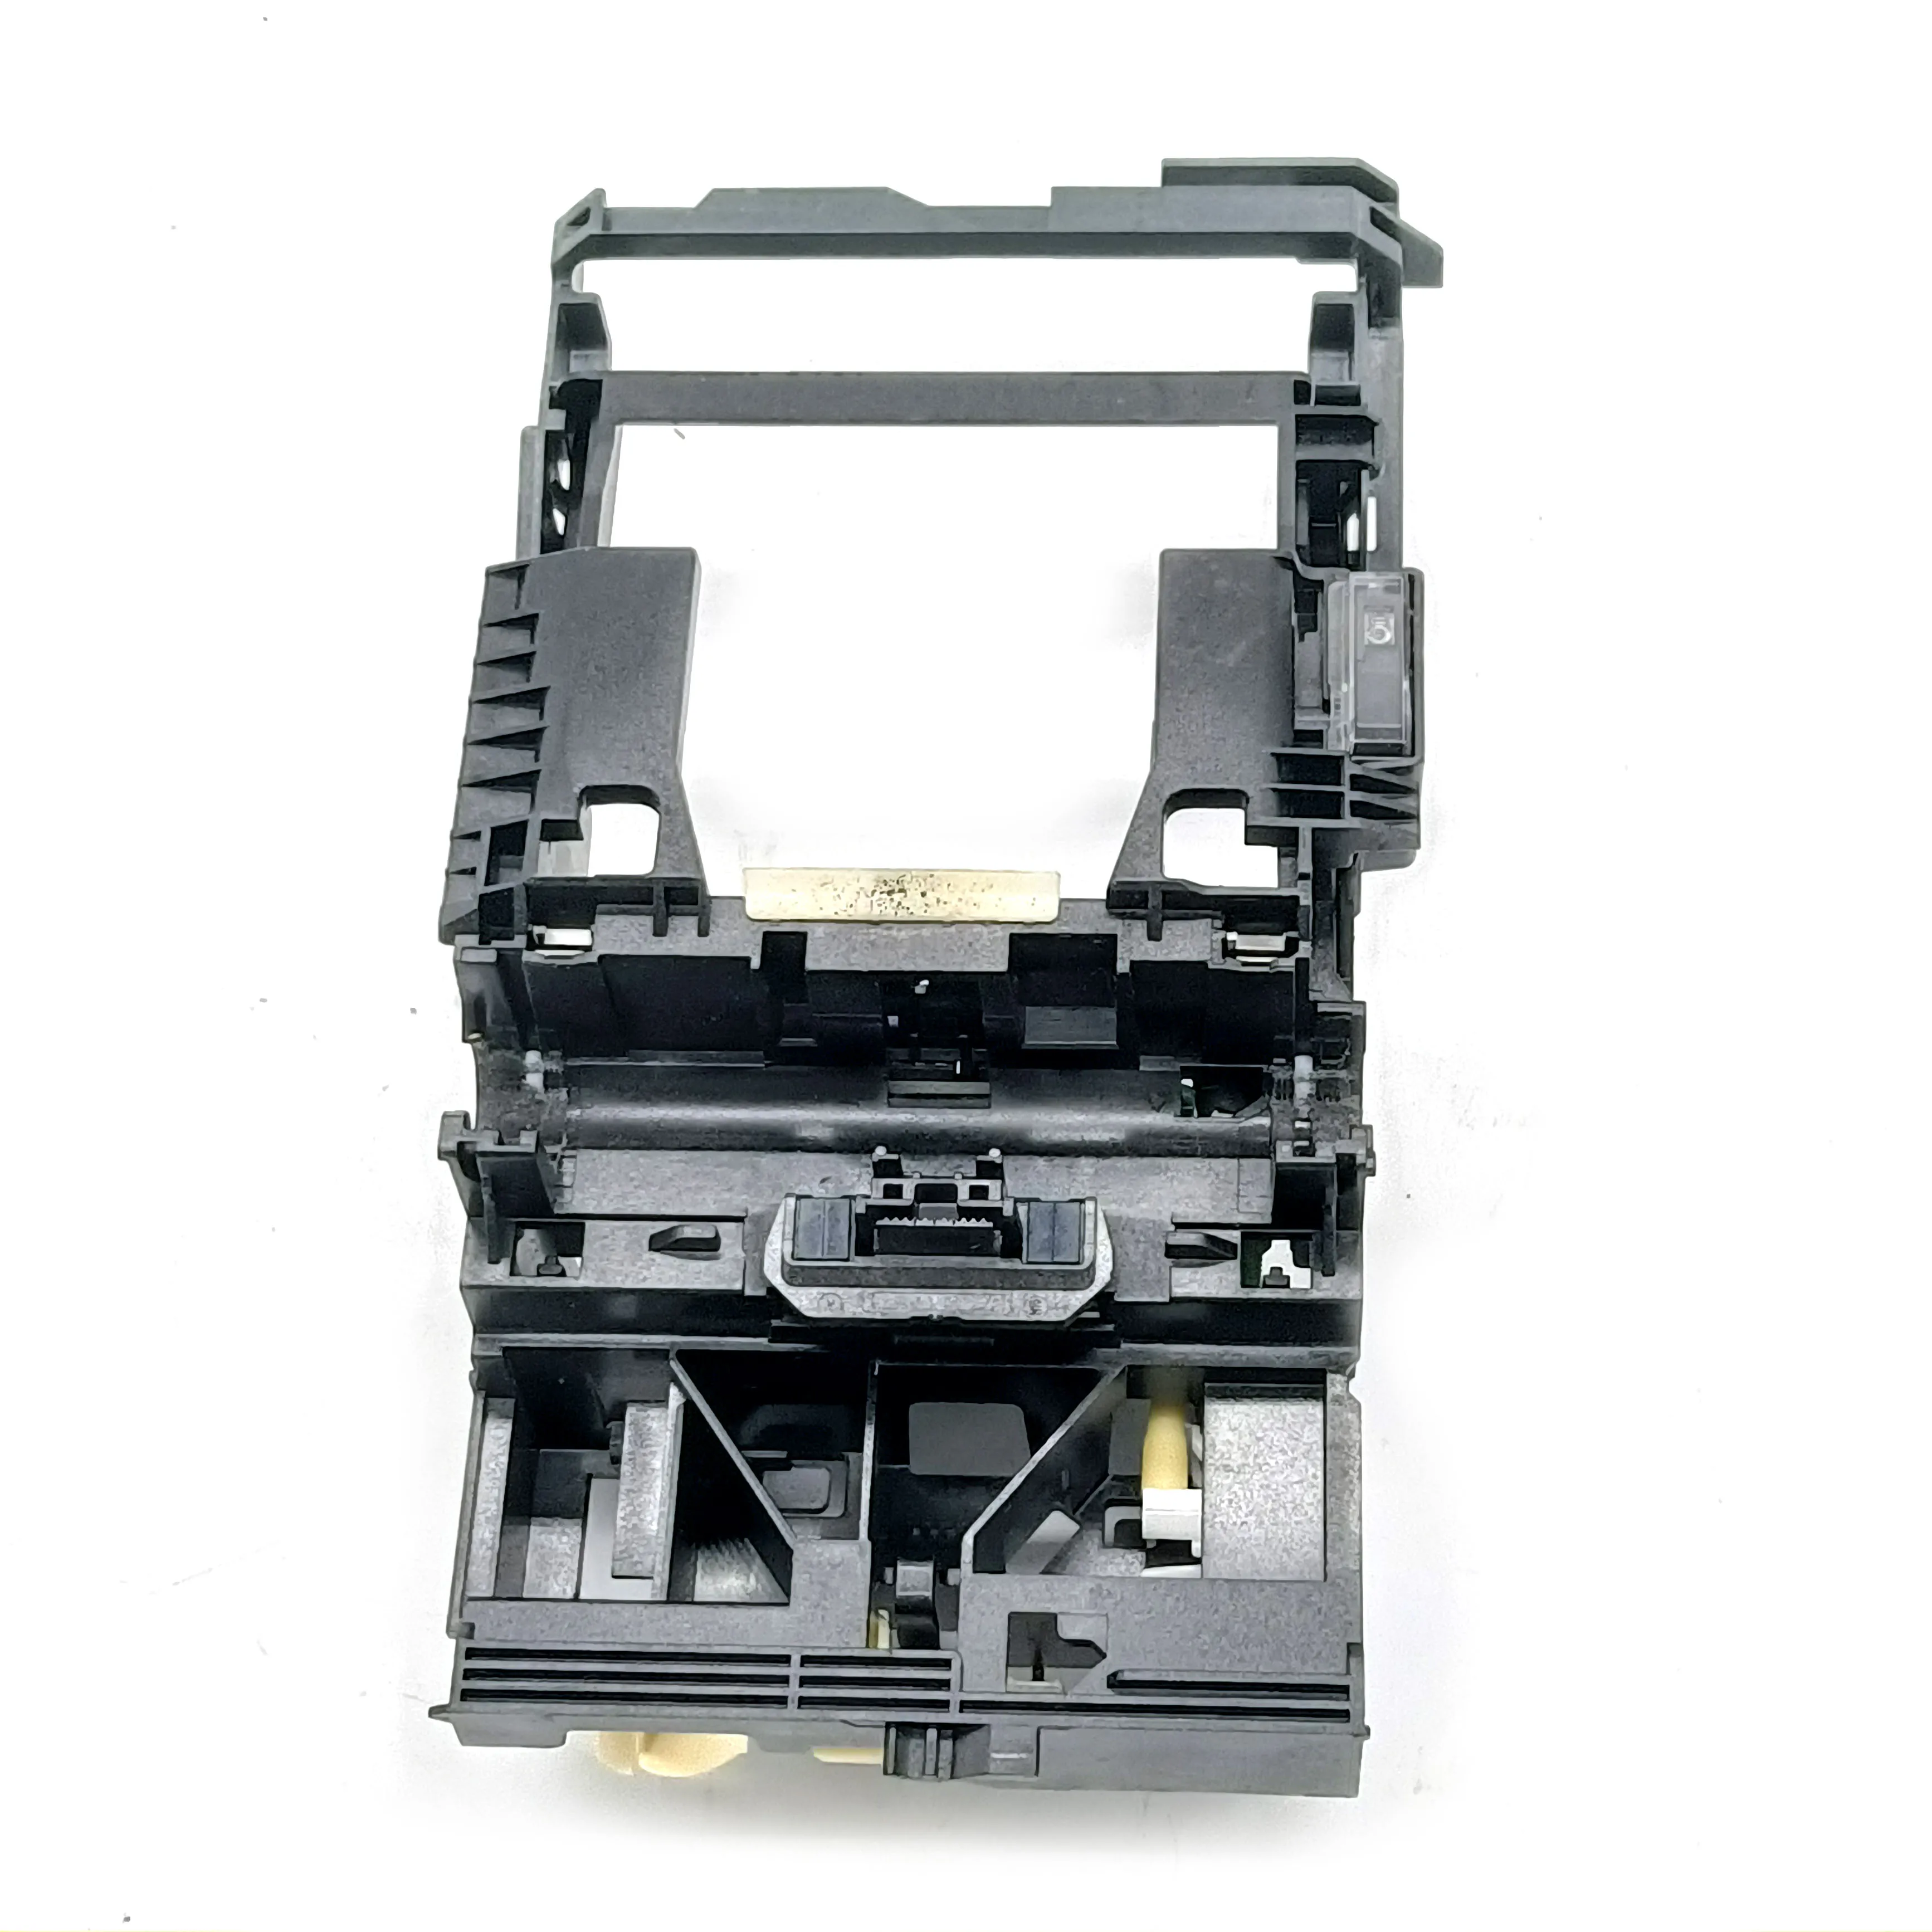 

Carriage 36 Inch CQ893-67011 Fits For HP DesignJet T520